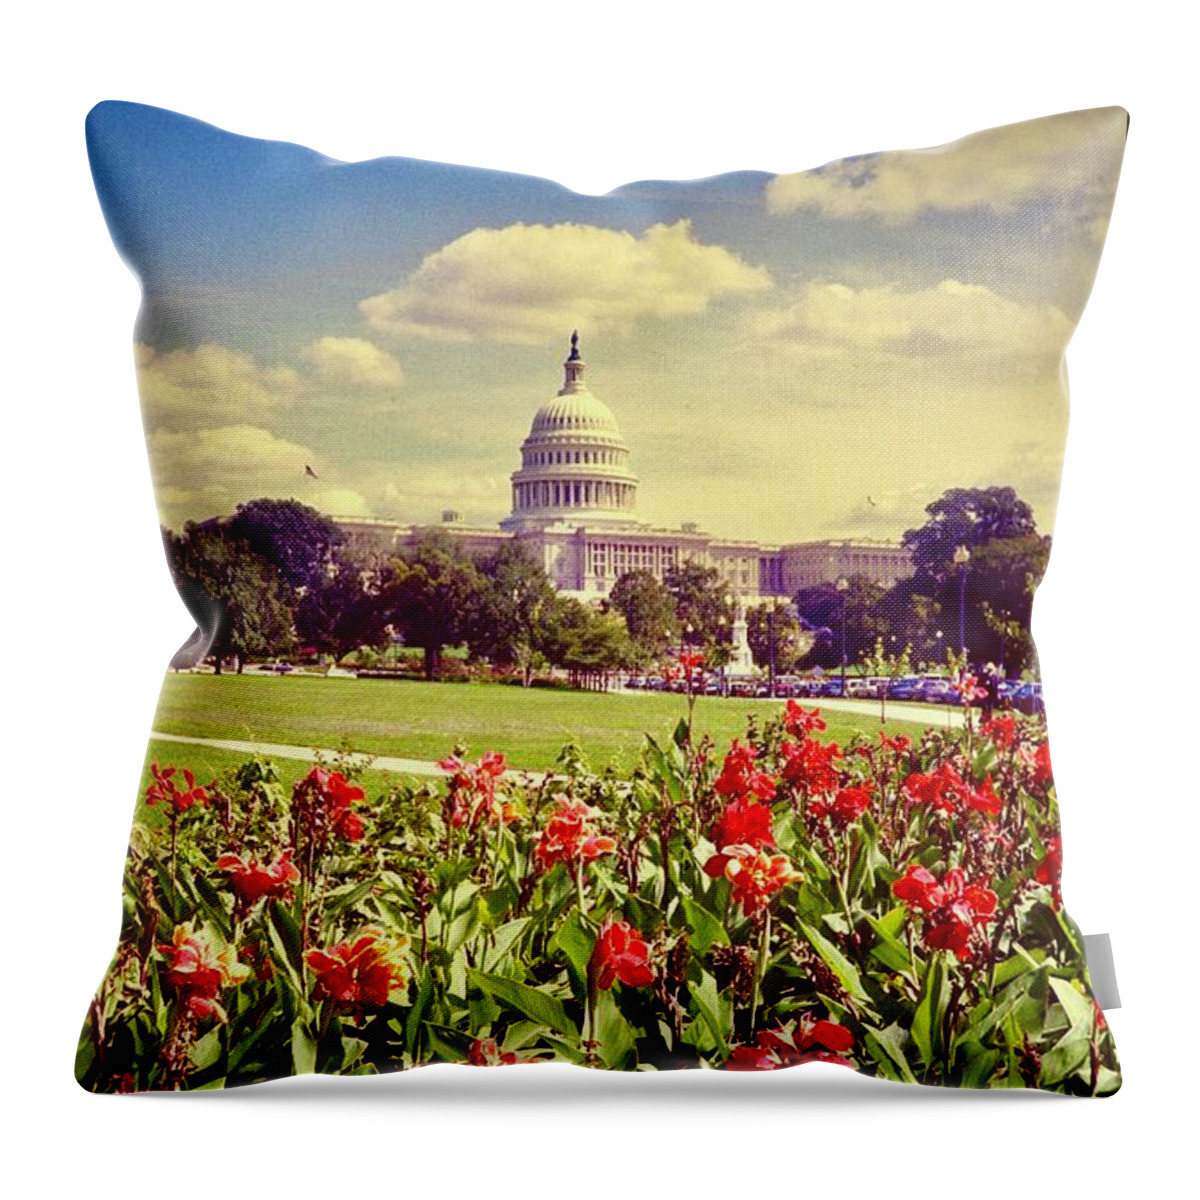  Throw Pillow featuring the photograph The Washington State Capitol 1984 by Gordon James